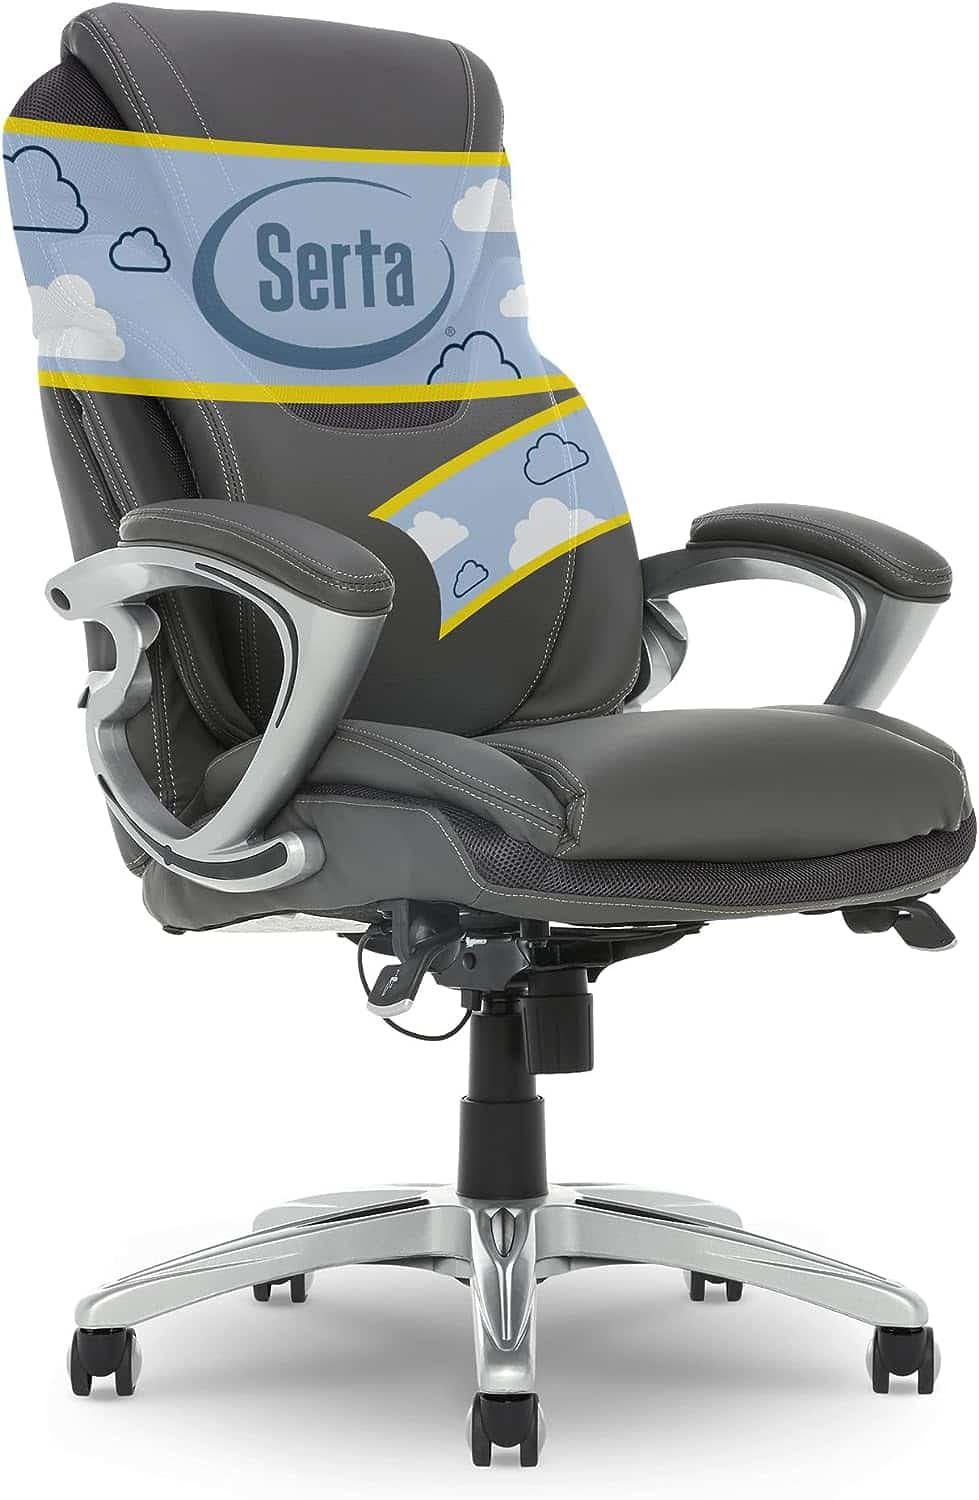 Serta Office Chair: A Seat of Serenity